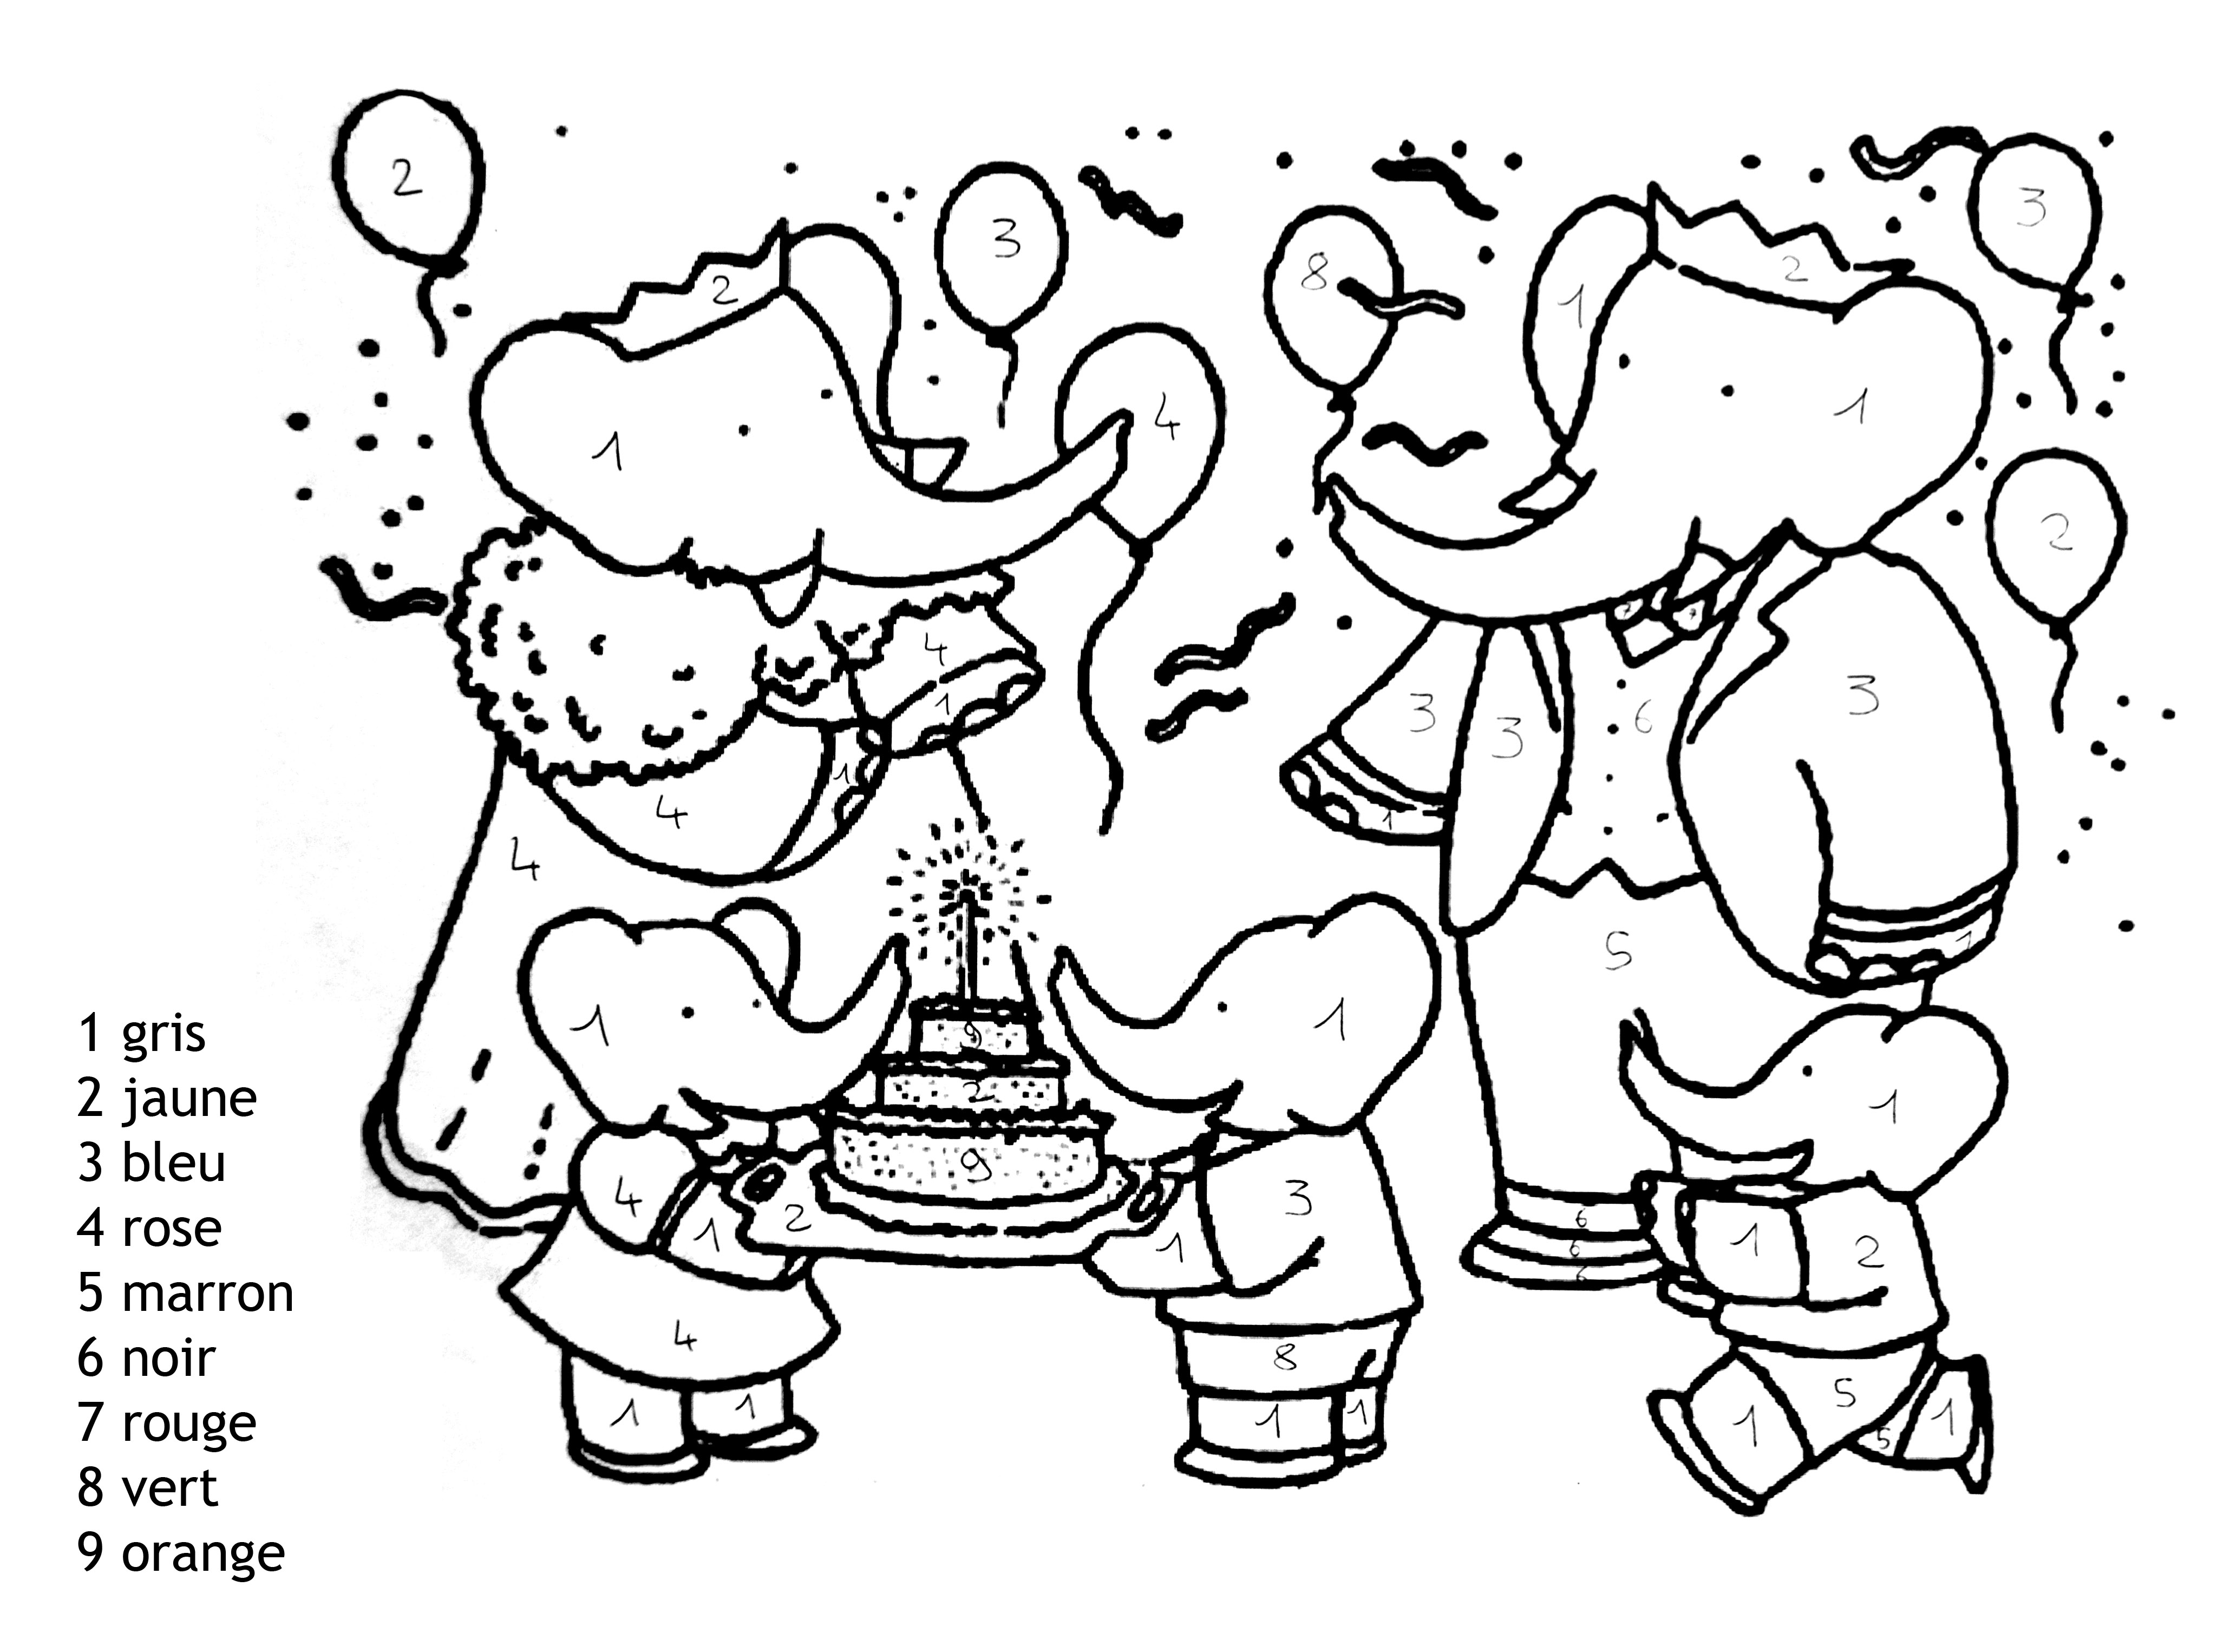 Magic Coloring coloring page to print and color : Babar and his elephant family